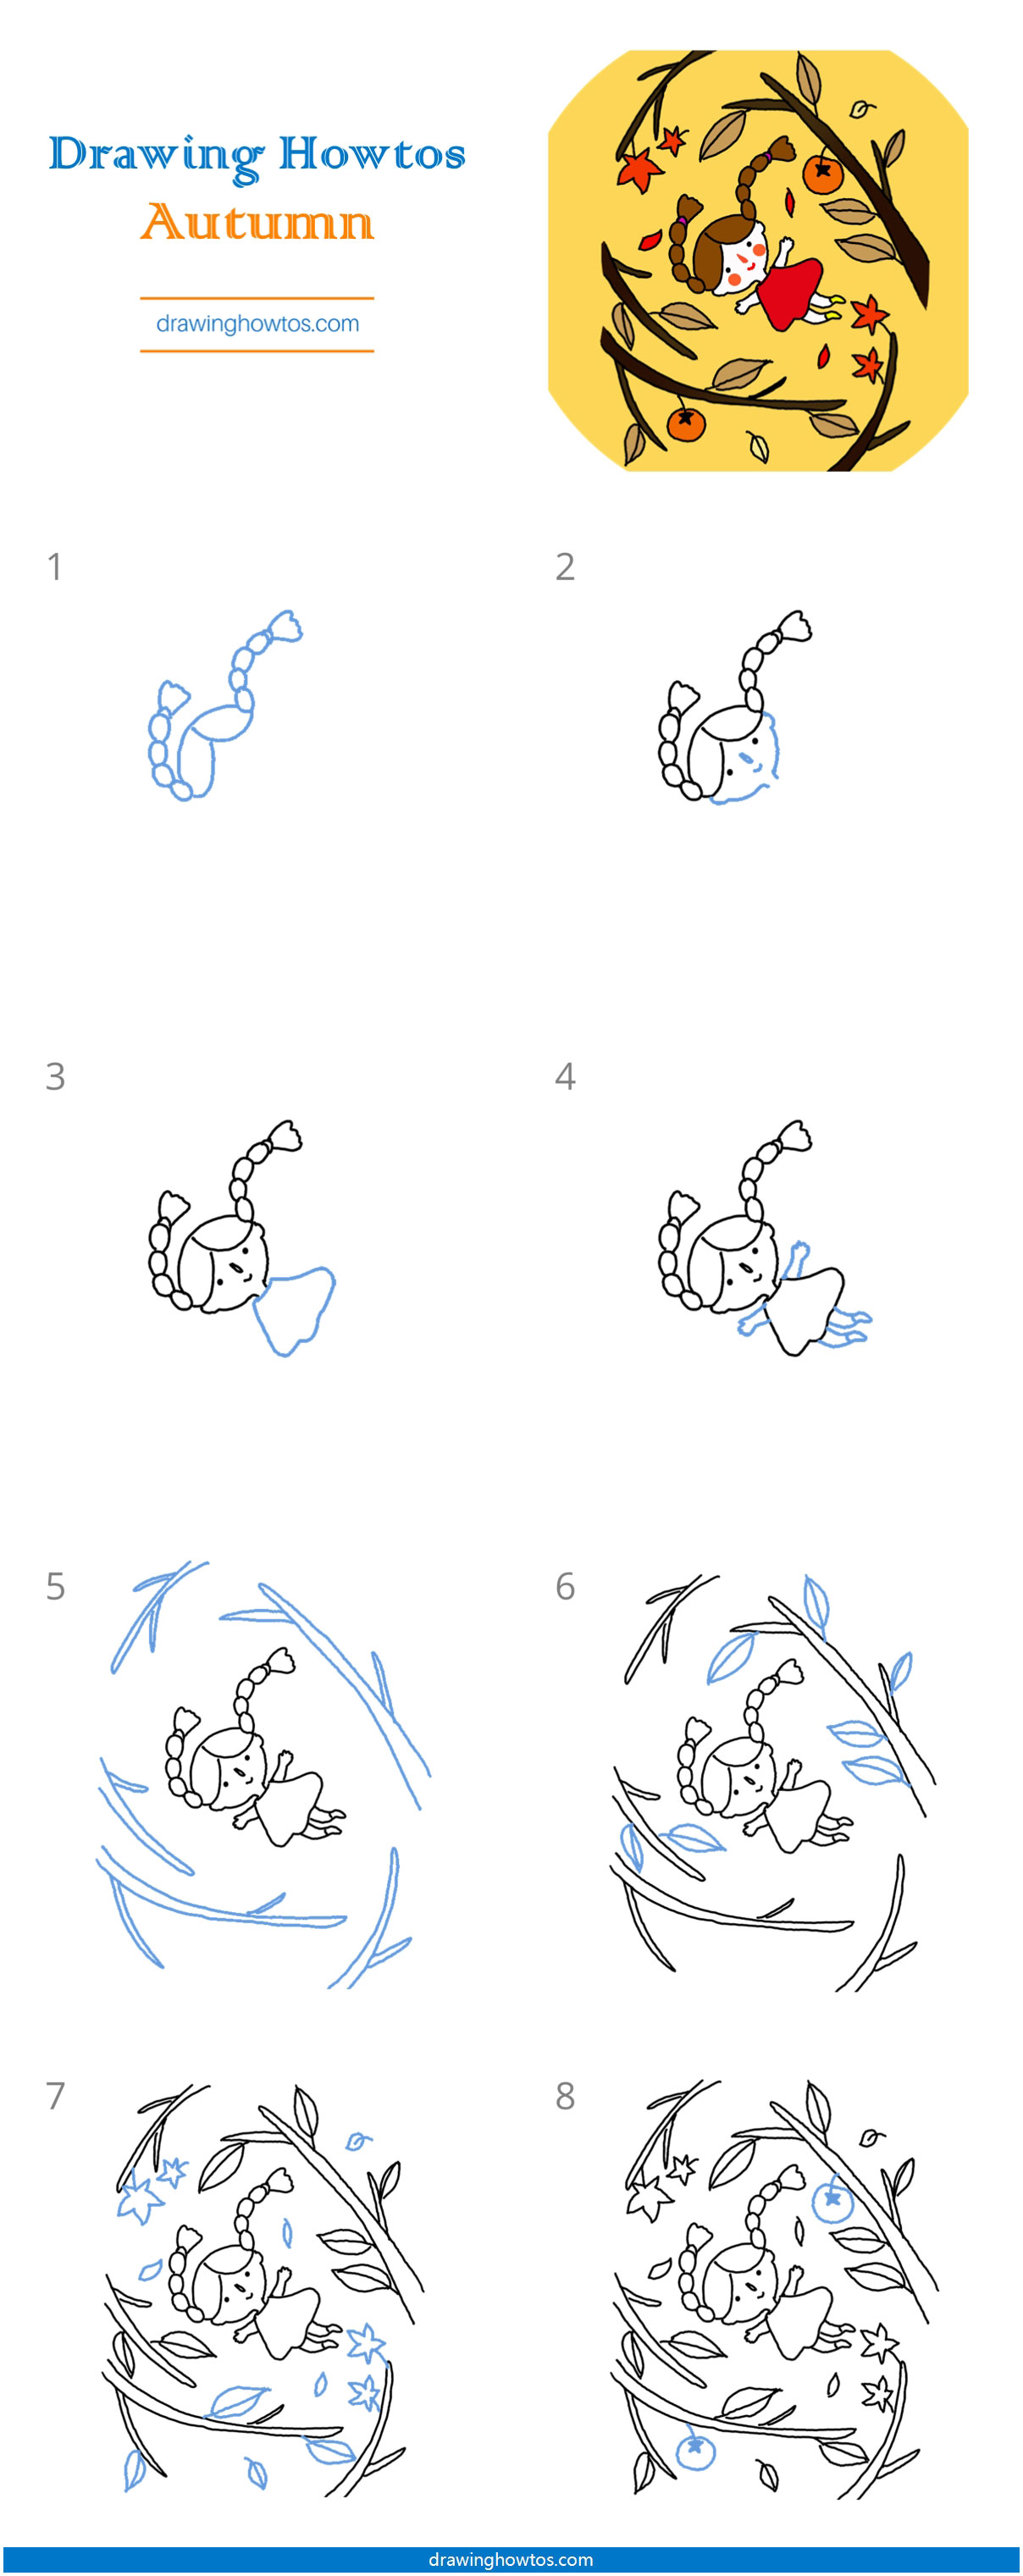 How to Draw an Autumn Scene Step by Step